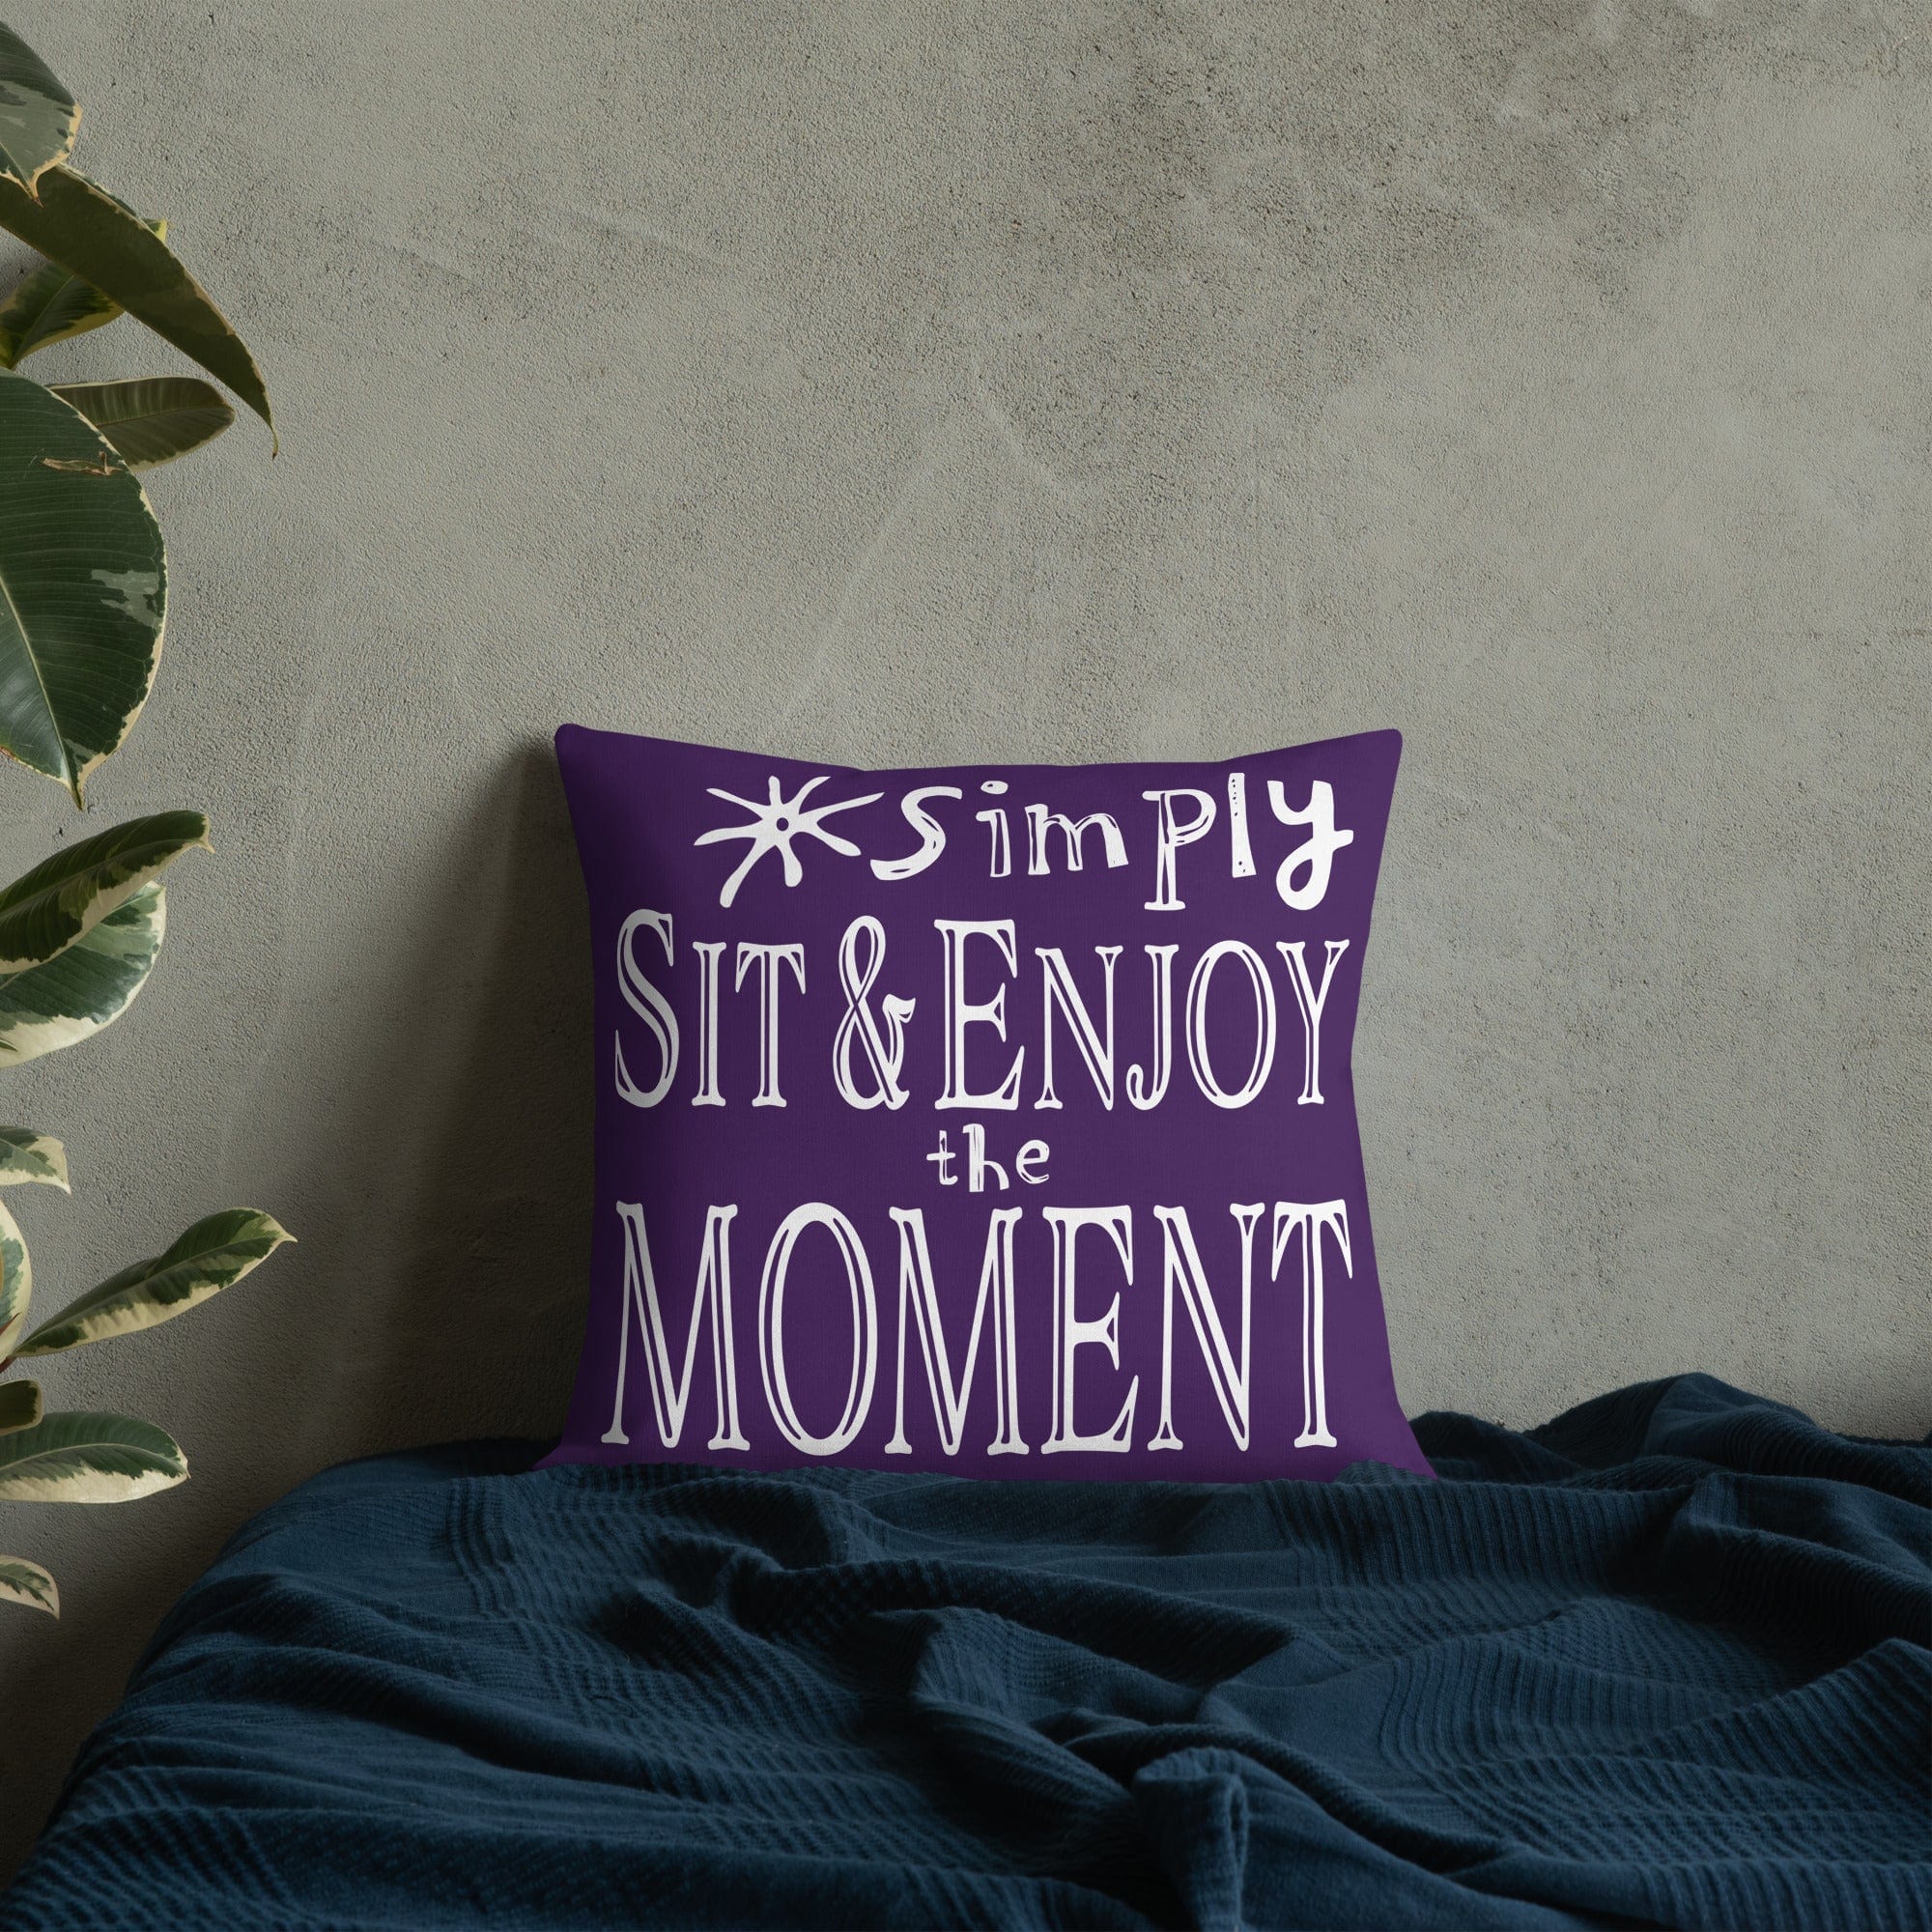 Simply Sit & Enjoy the Moment Mindfulness Decorative Pillow - Purple Throw Pillows A Moment Of Now Women’s Boutique Clothing Online Lifestyle Store